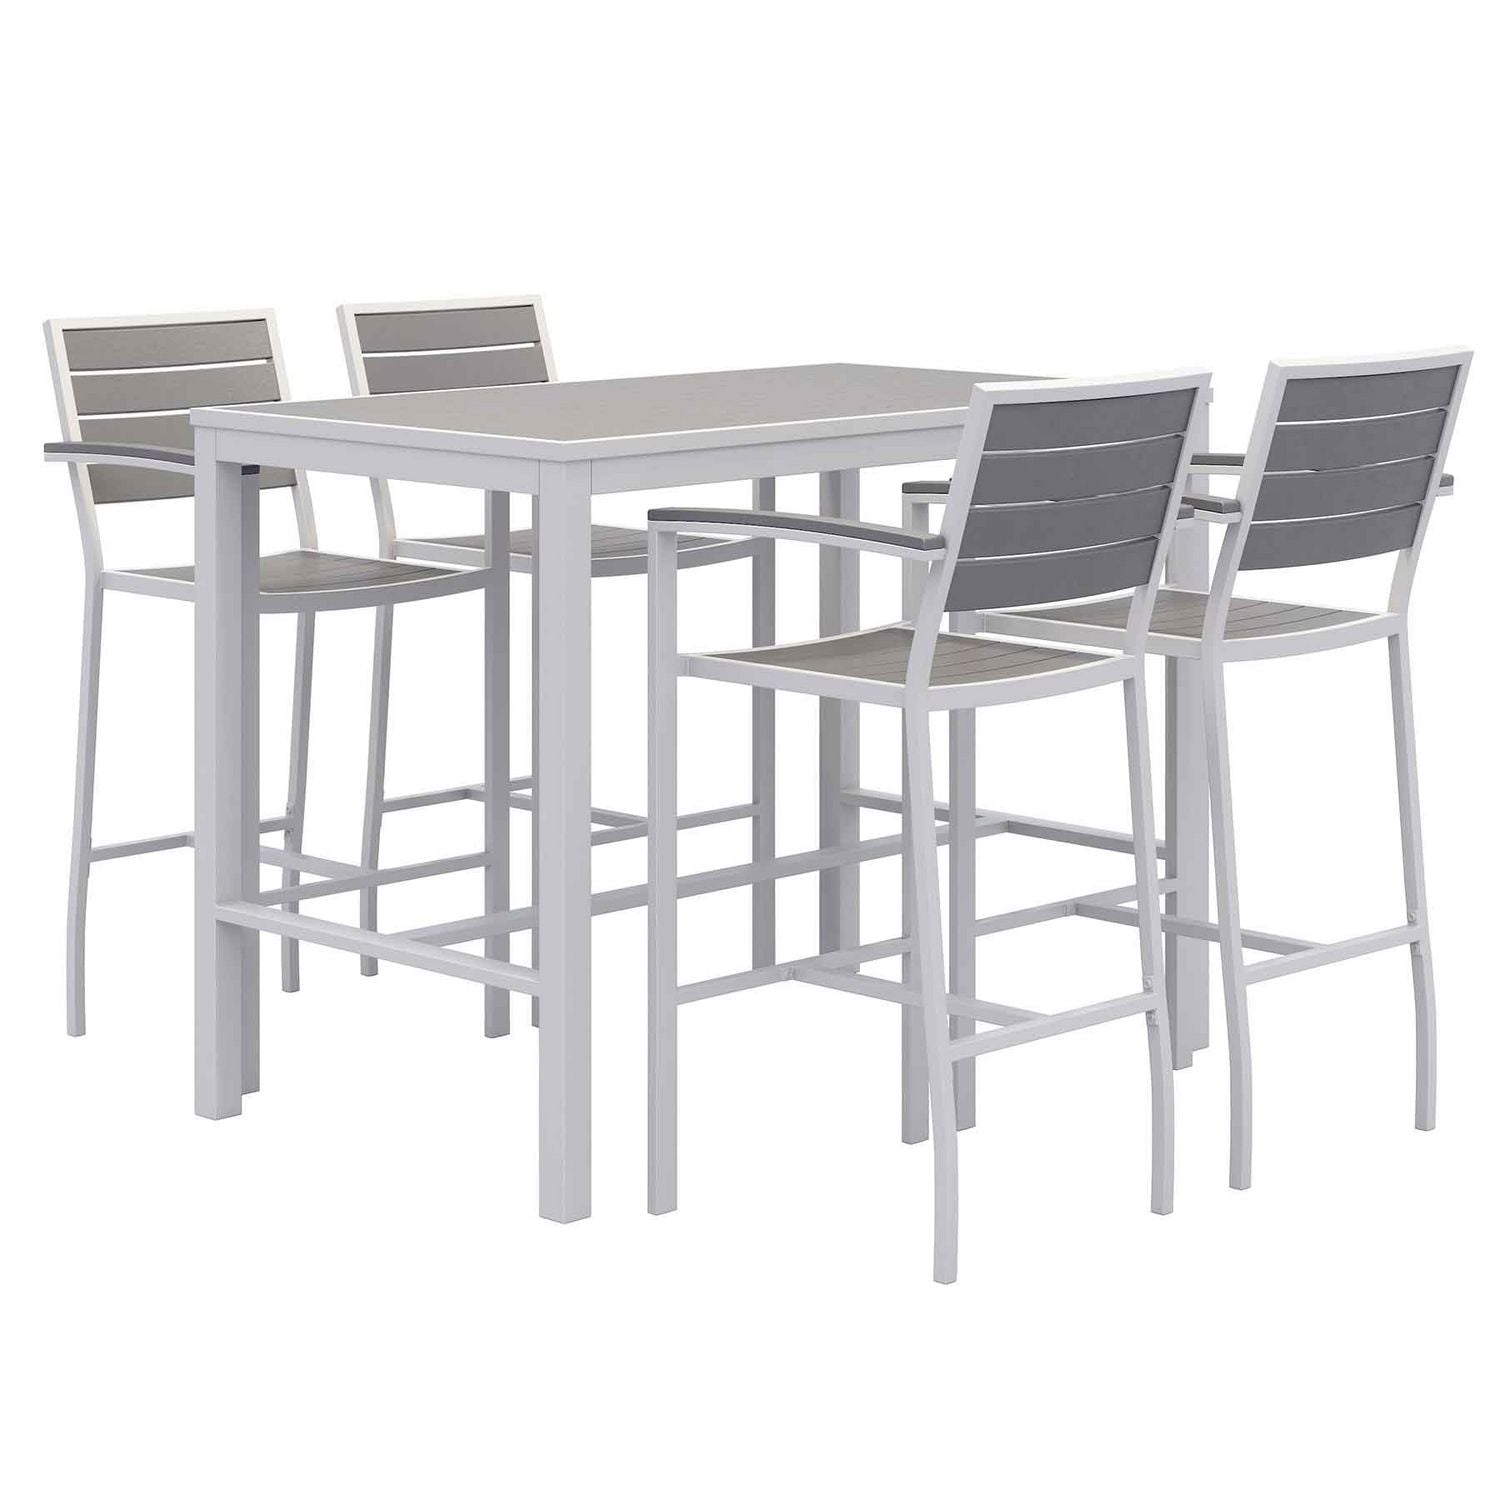 eveleen-outdoor-bistro-patio-table-with-four-gray-powder-coated-polymer-barstools-32-x-55-gray-ships-in-4-6-business-days_kfi840031925206 - 1